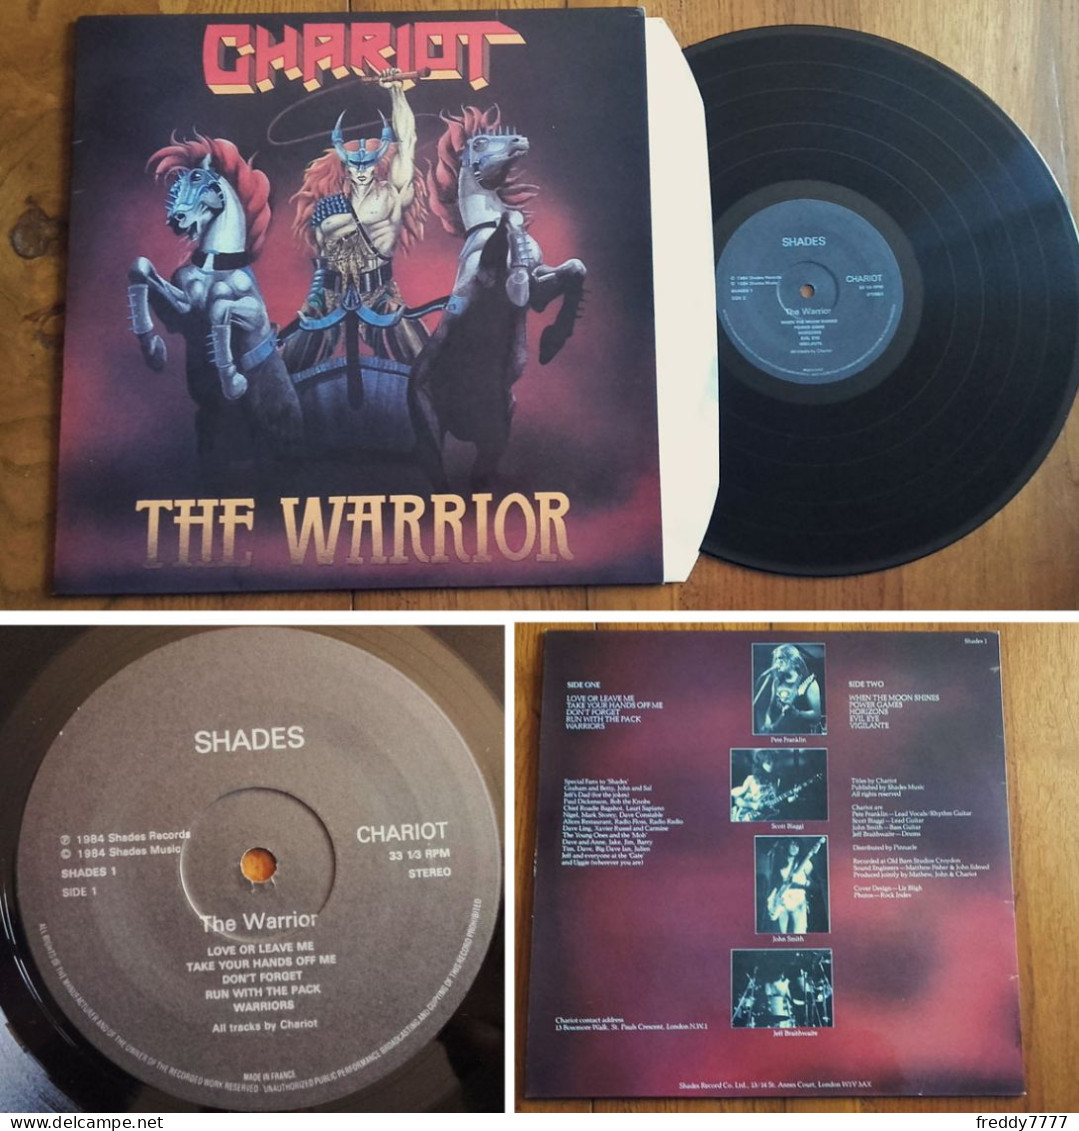 RARE French LP 33 RPM (12 Inch') CHARIOT "The Warrior" (1984) - Hard Rock & Metal